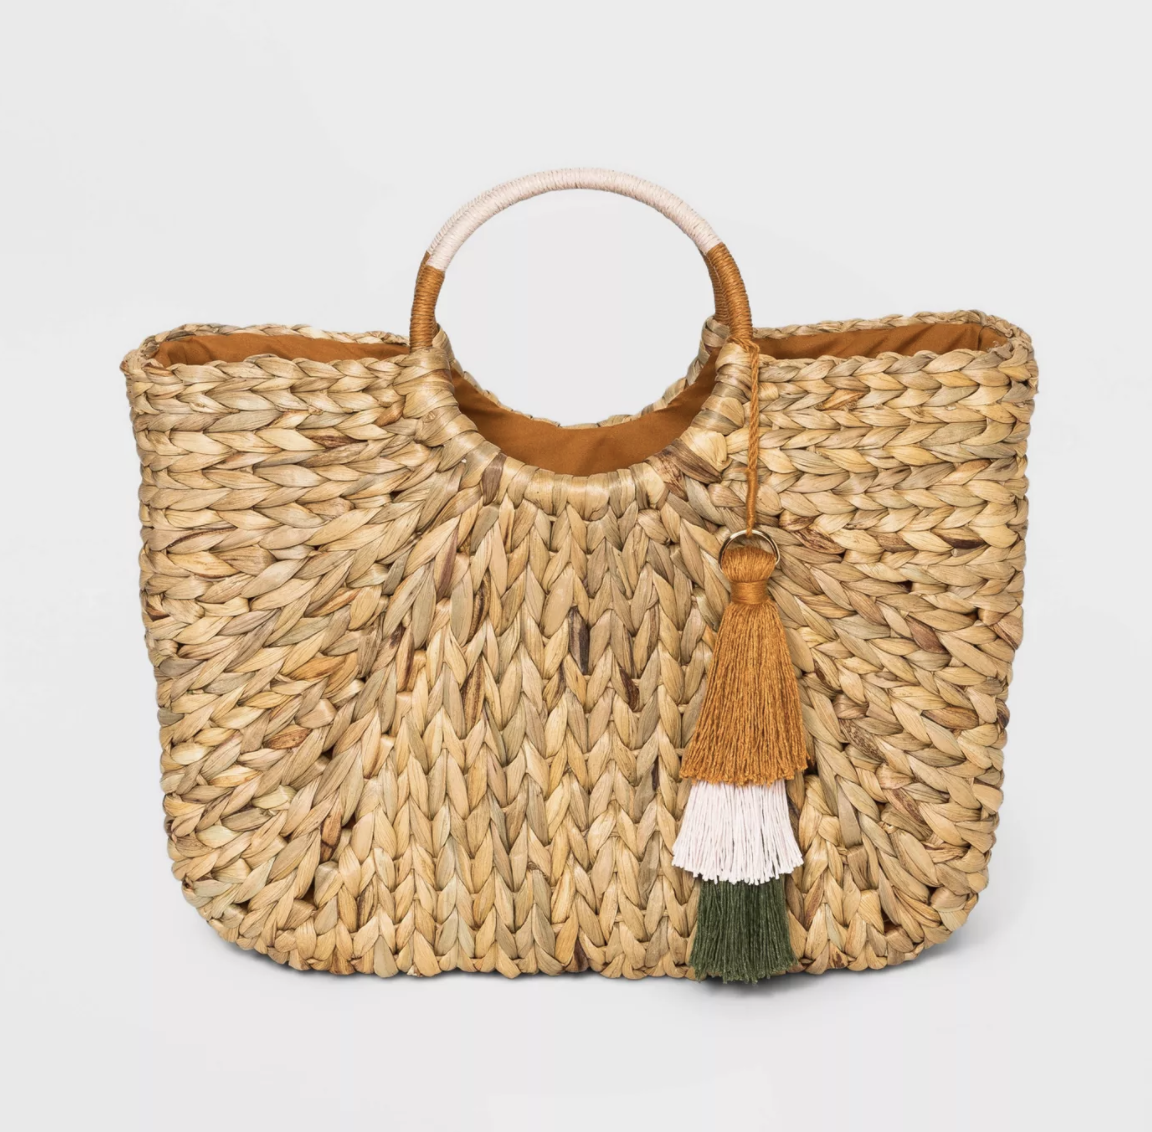 The straw tote with circle handles and a decorative tassel 